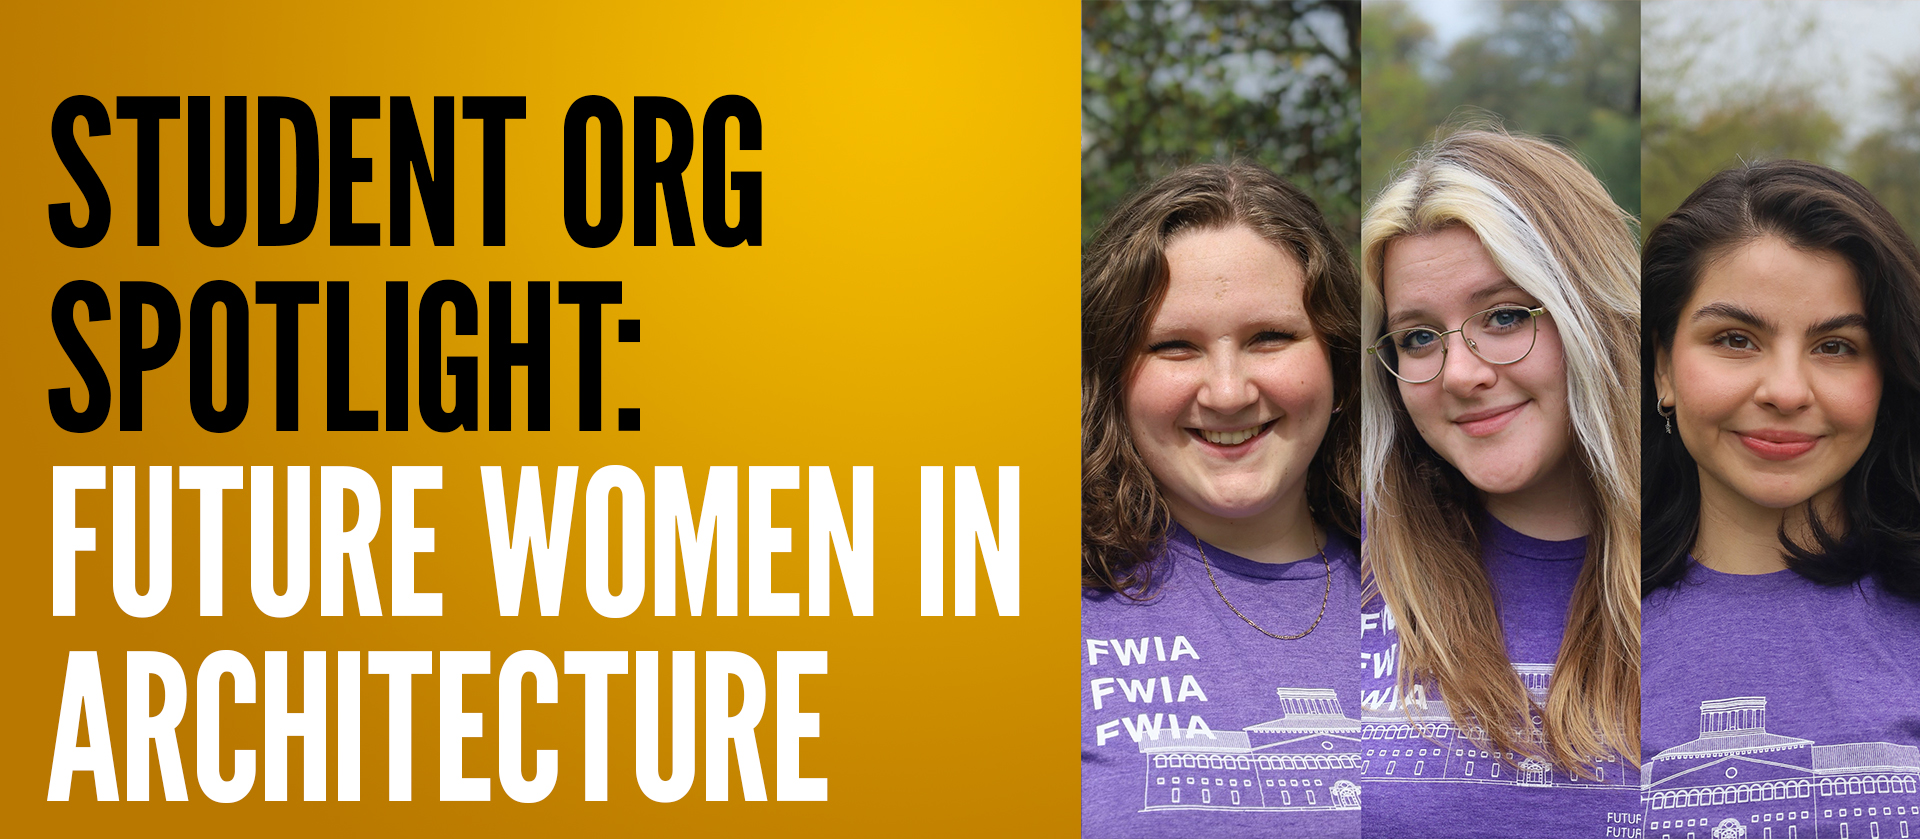 Hines College Students Organizations You Should Know: Future Women in Architecture (FWIA)